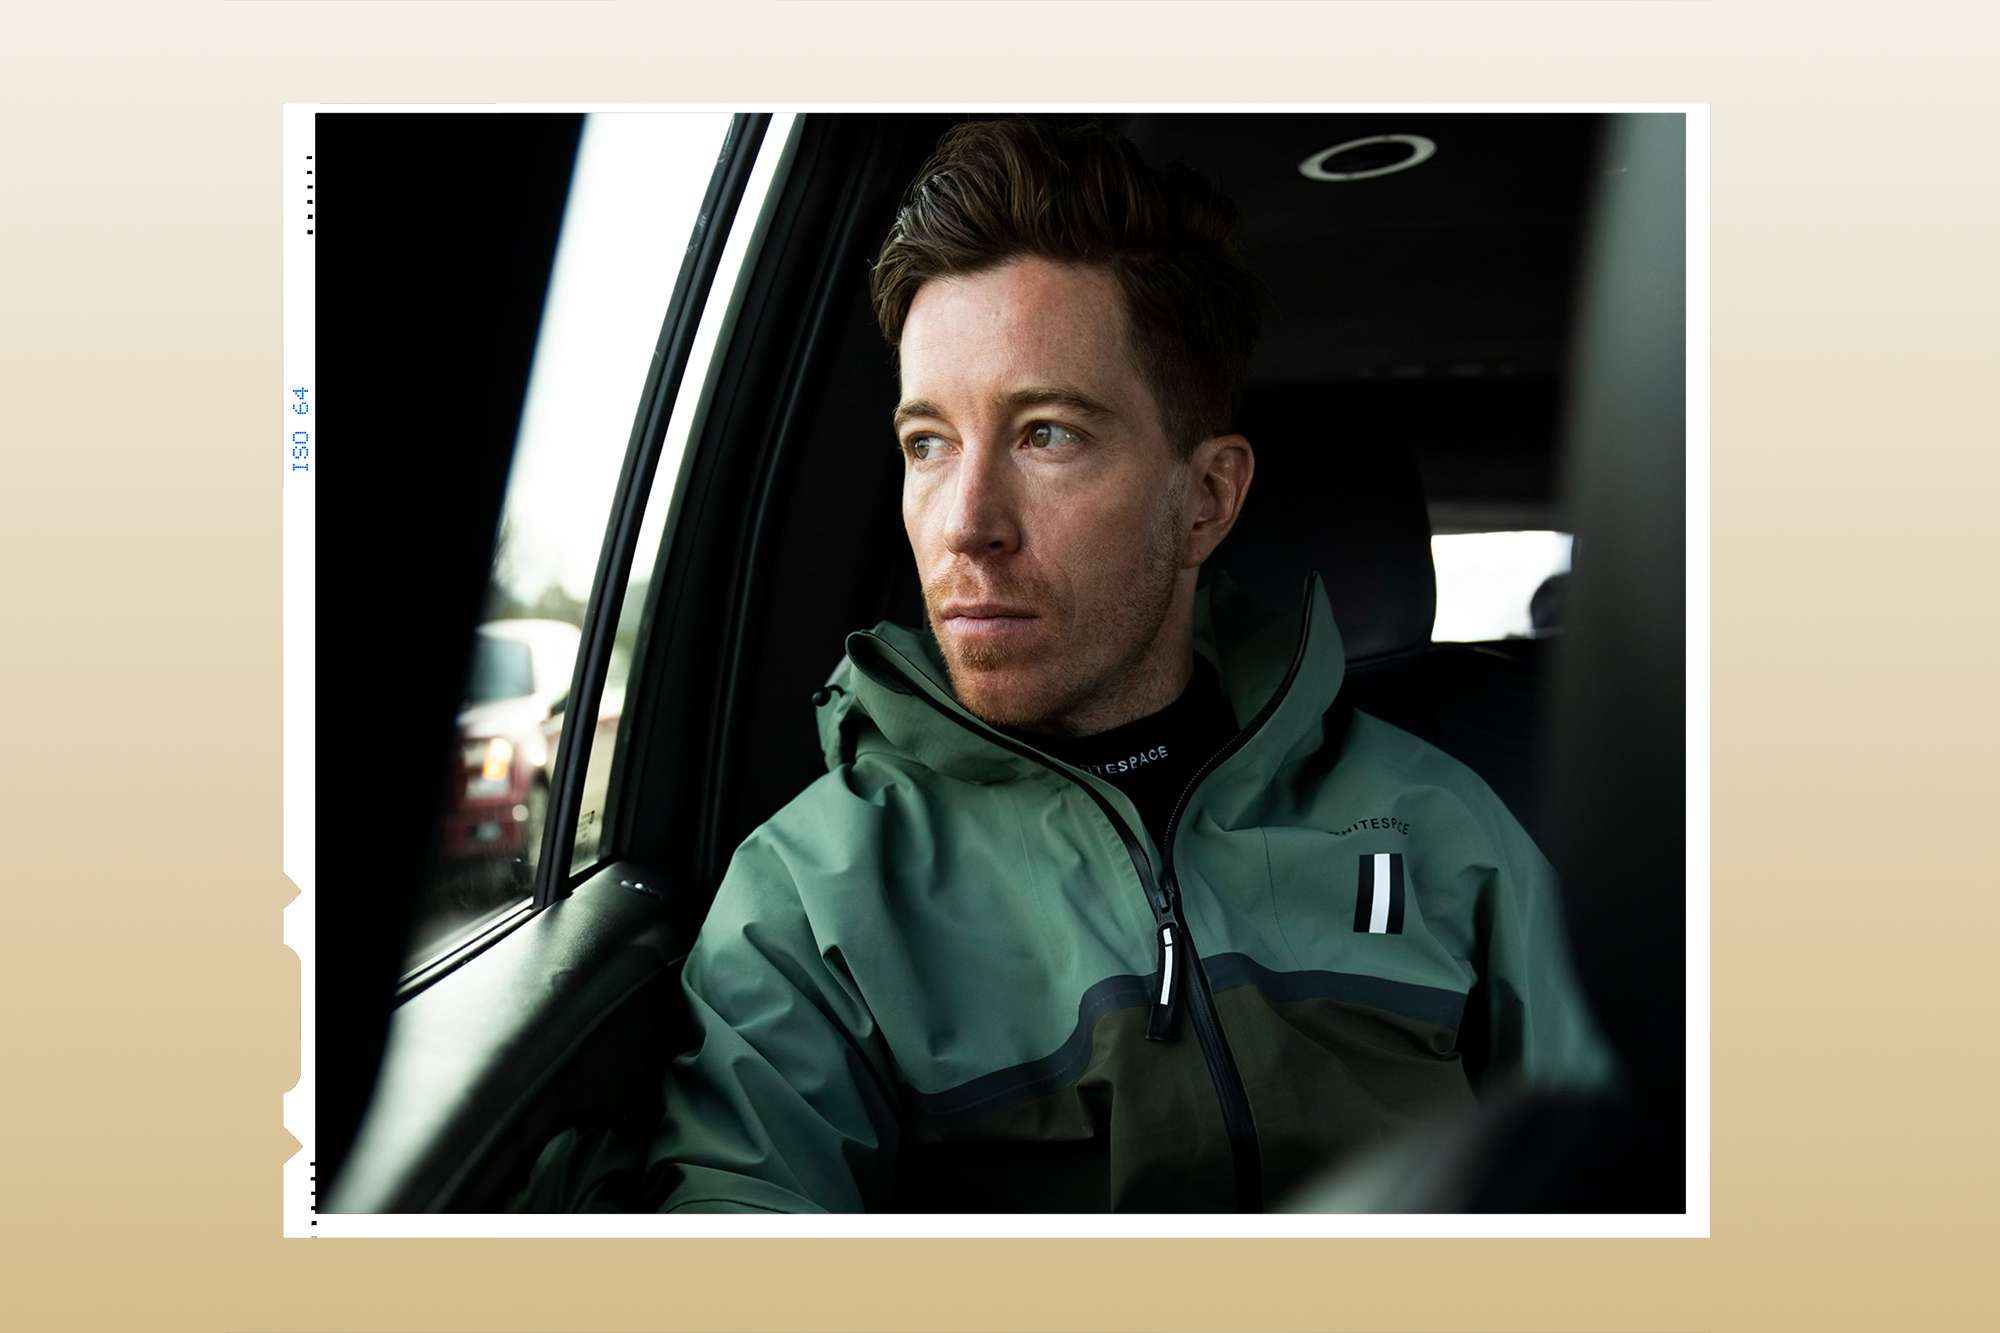 olympic snowboarder shaun white on his favorite après-ski activity and travel plans in retirement